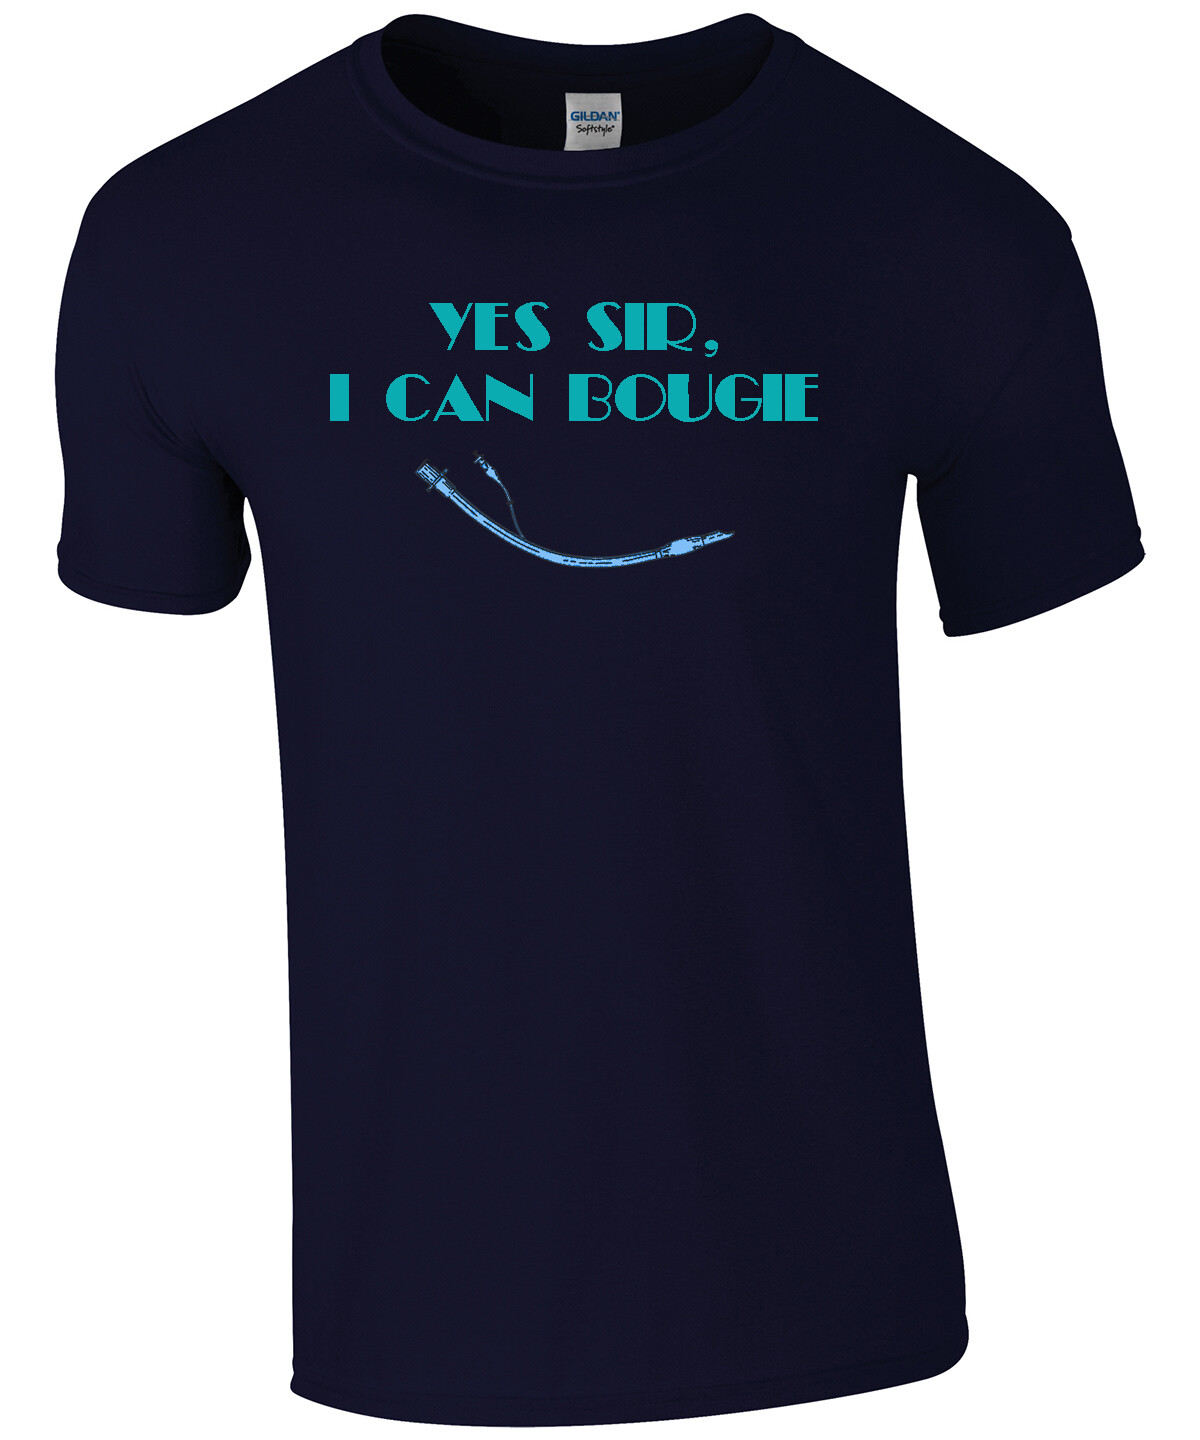 Yes Sir, I can Bougie T-shirt